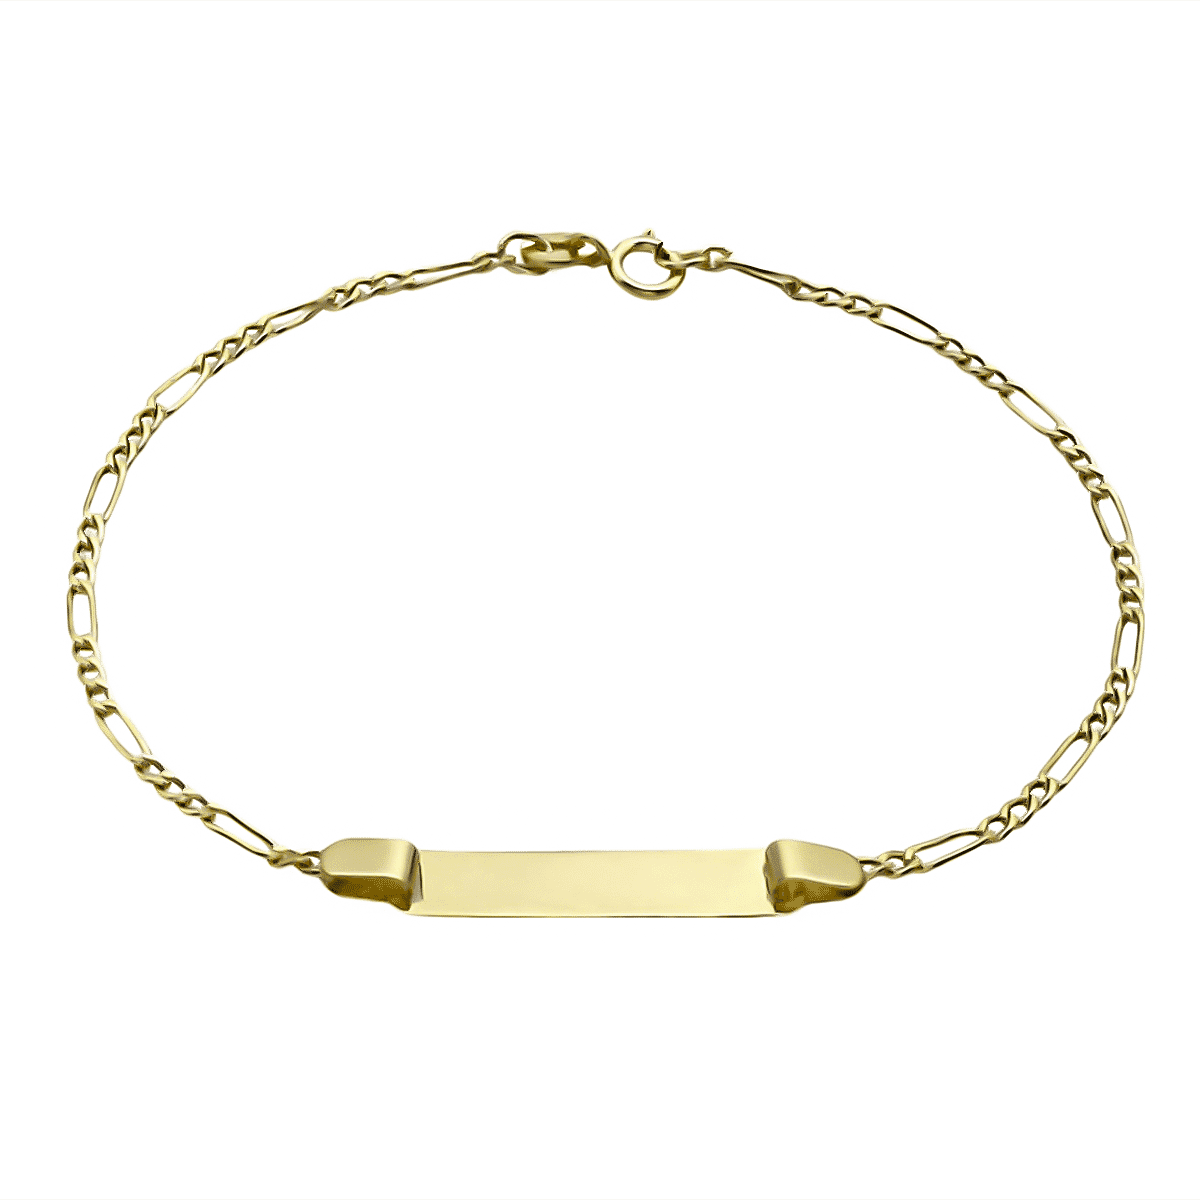 LIMITED EDITION Italian Designer Close Out - 9K Yellow Gold Figaro Link ID Bracelet (Size - 7)